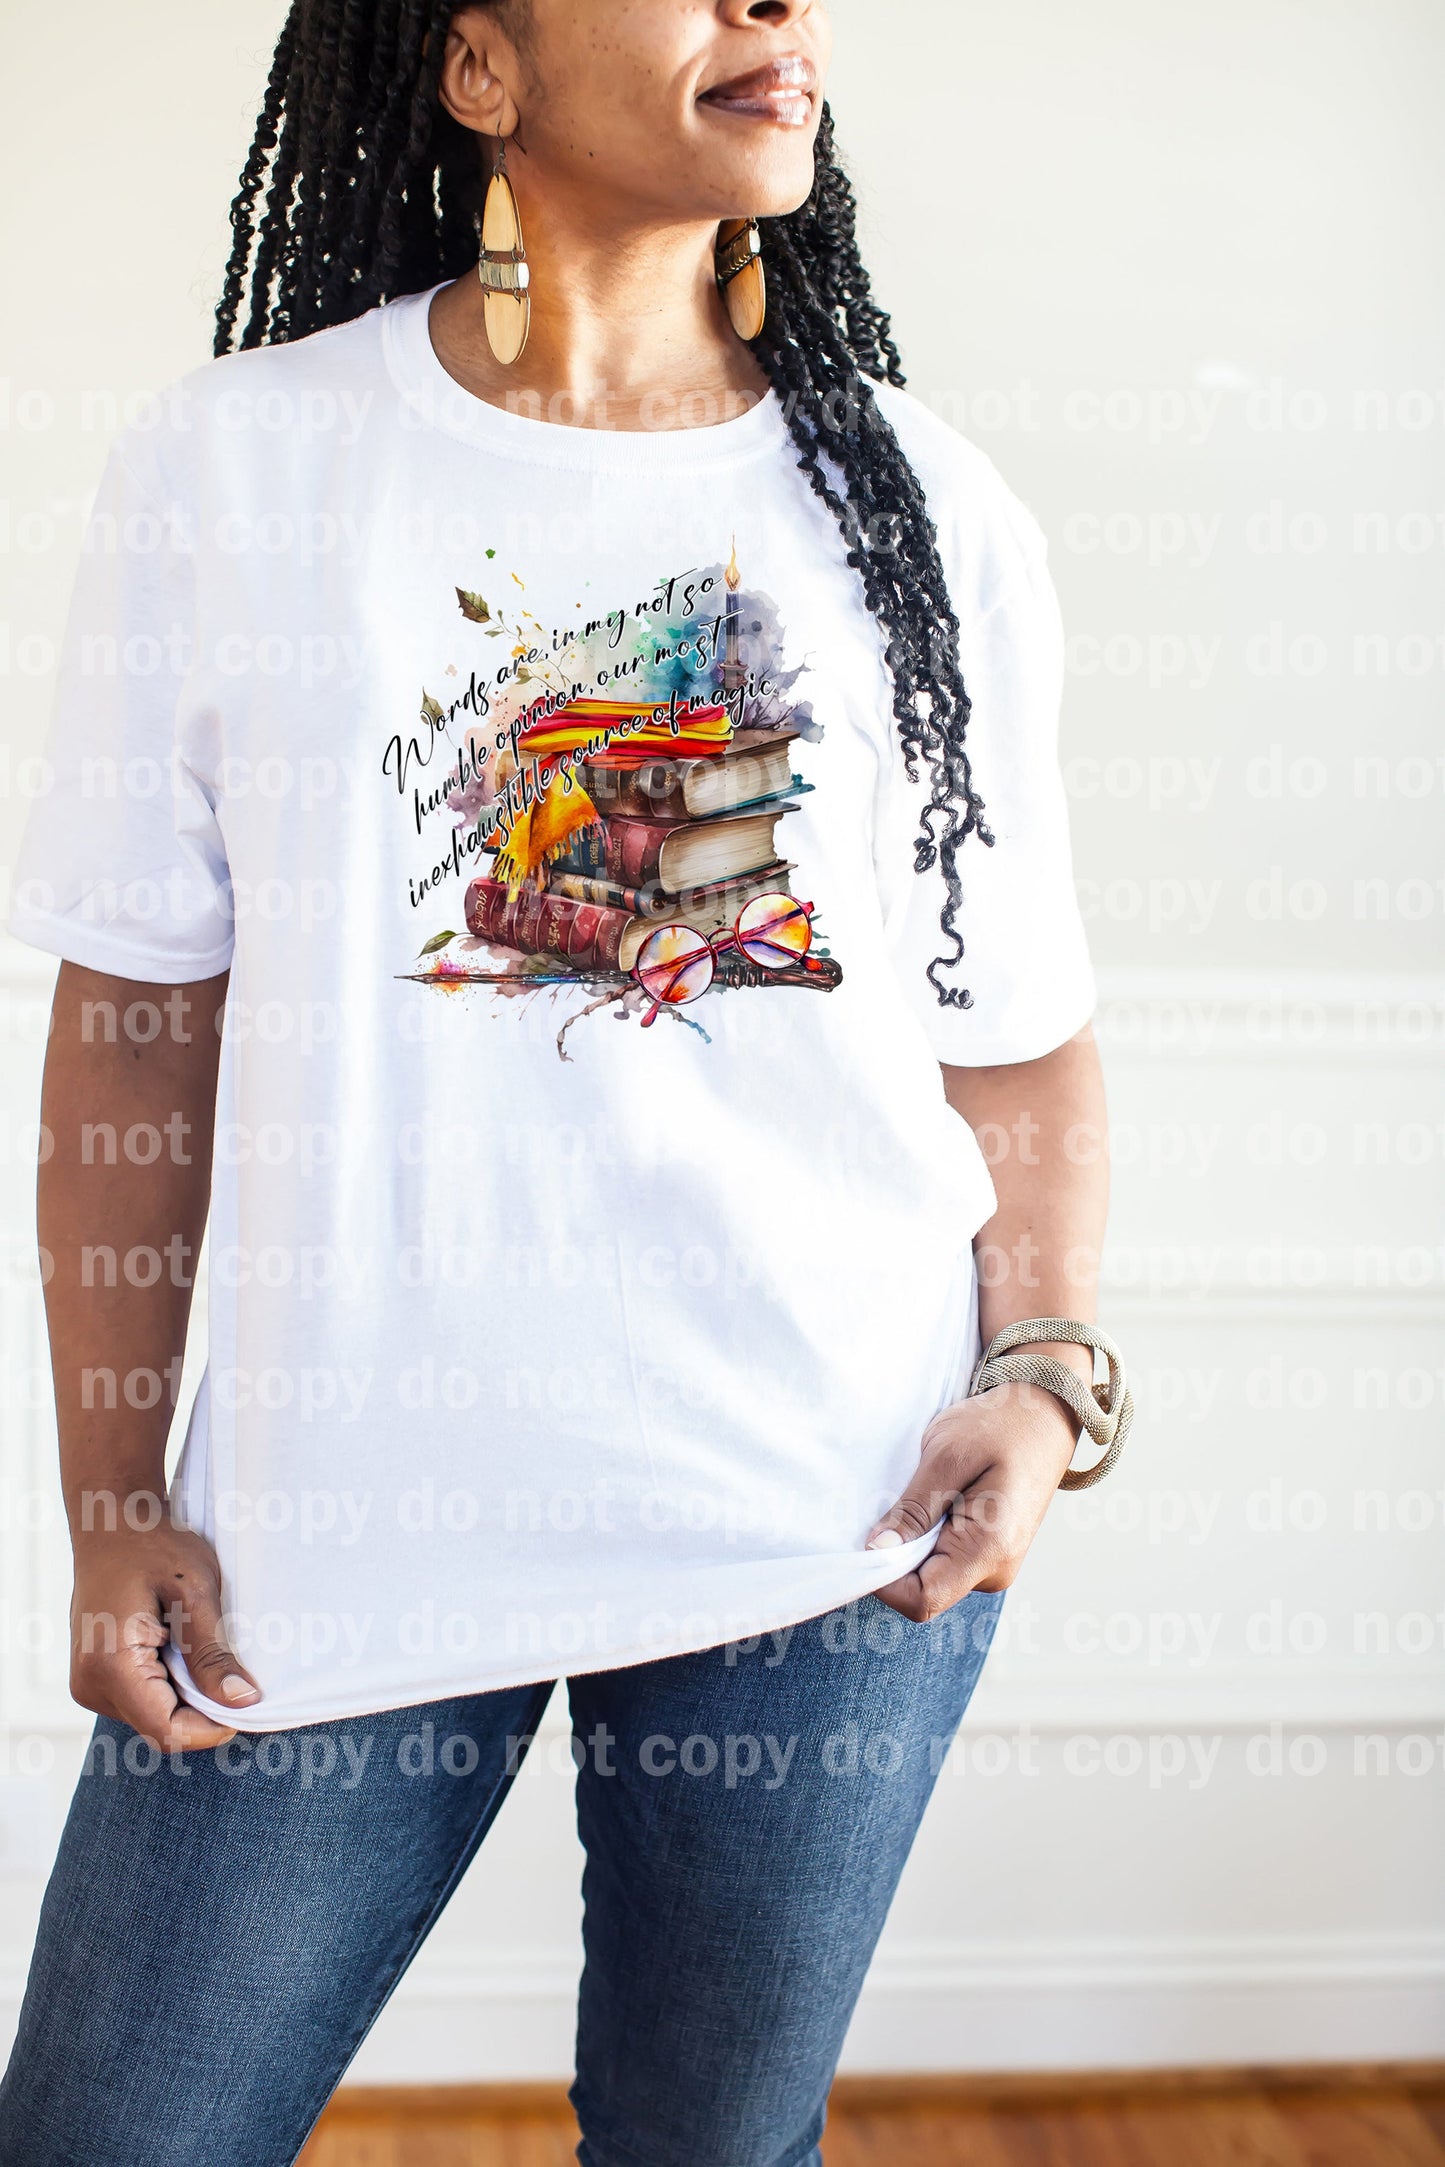 Words Are In My Not So Humble Opinion Dream Print or Sublimation Print